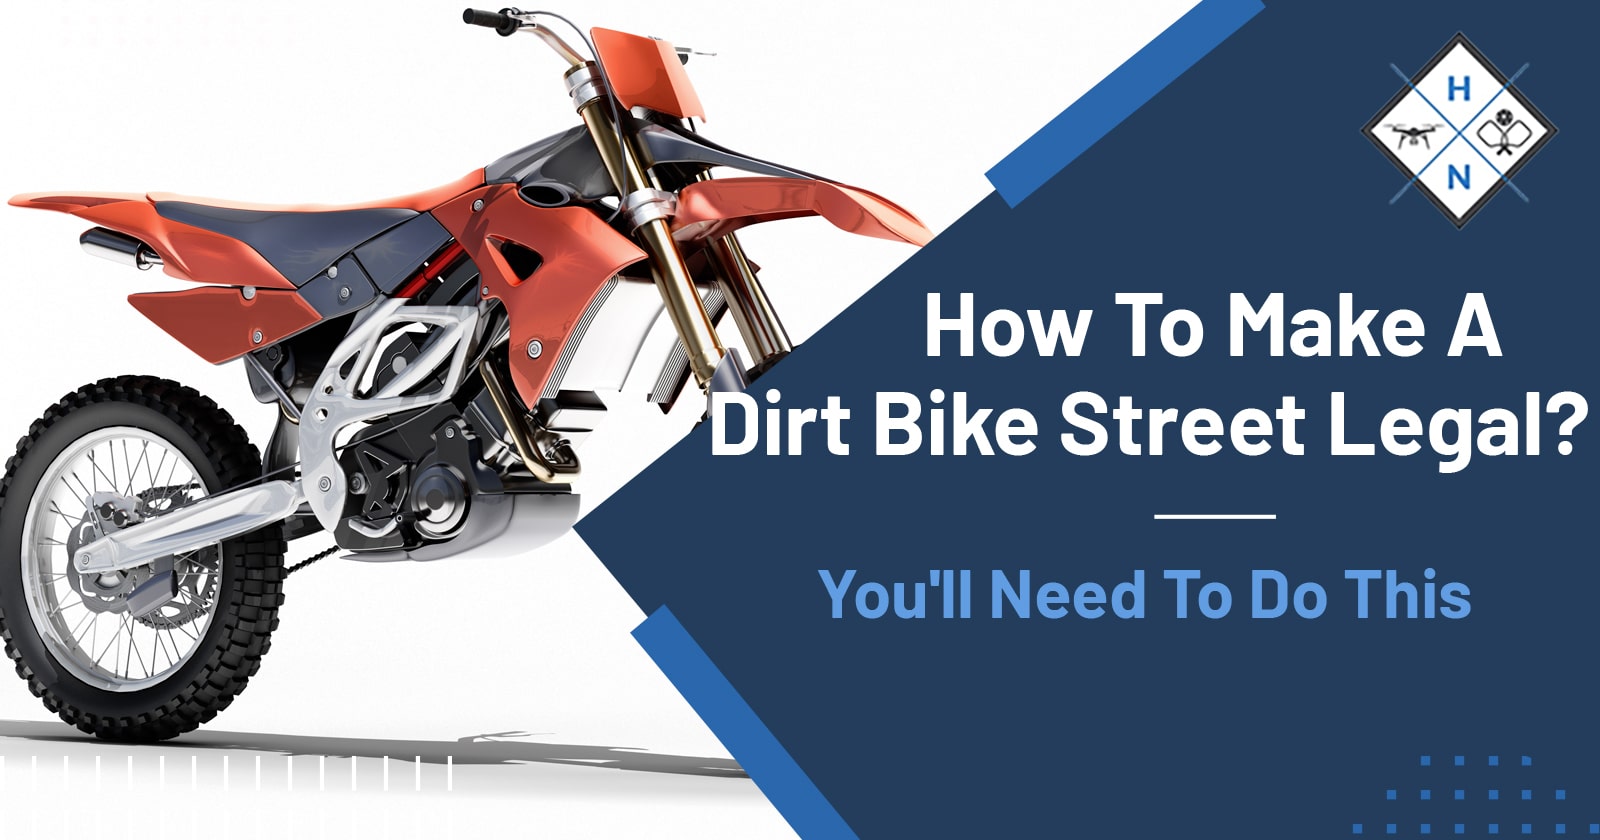 How to Make a Dirt Bike Street Legal? You'll Need To Do This